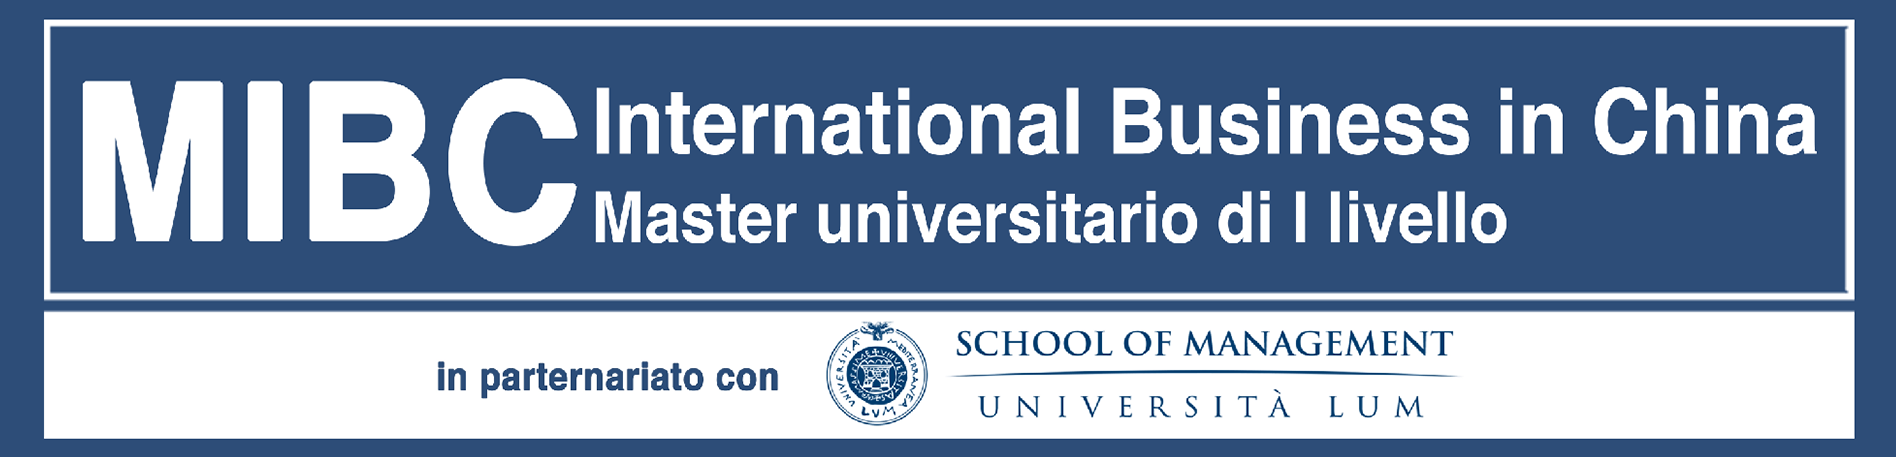 MIBC - Master International Business in China